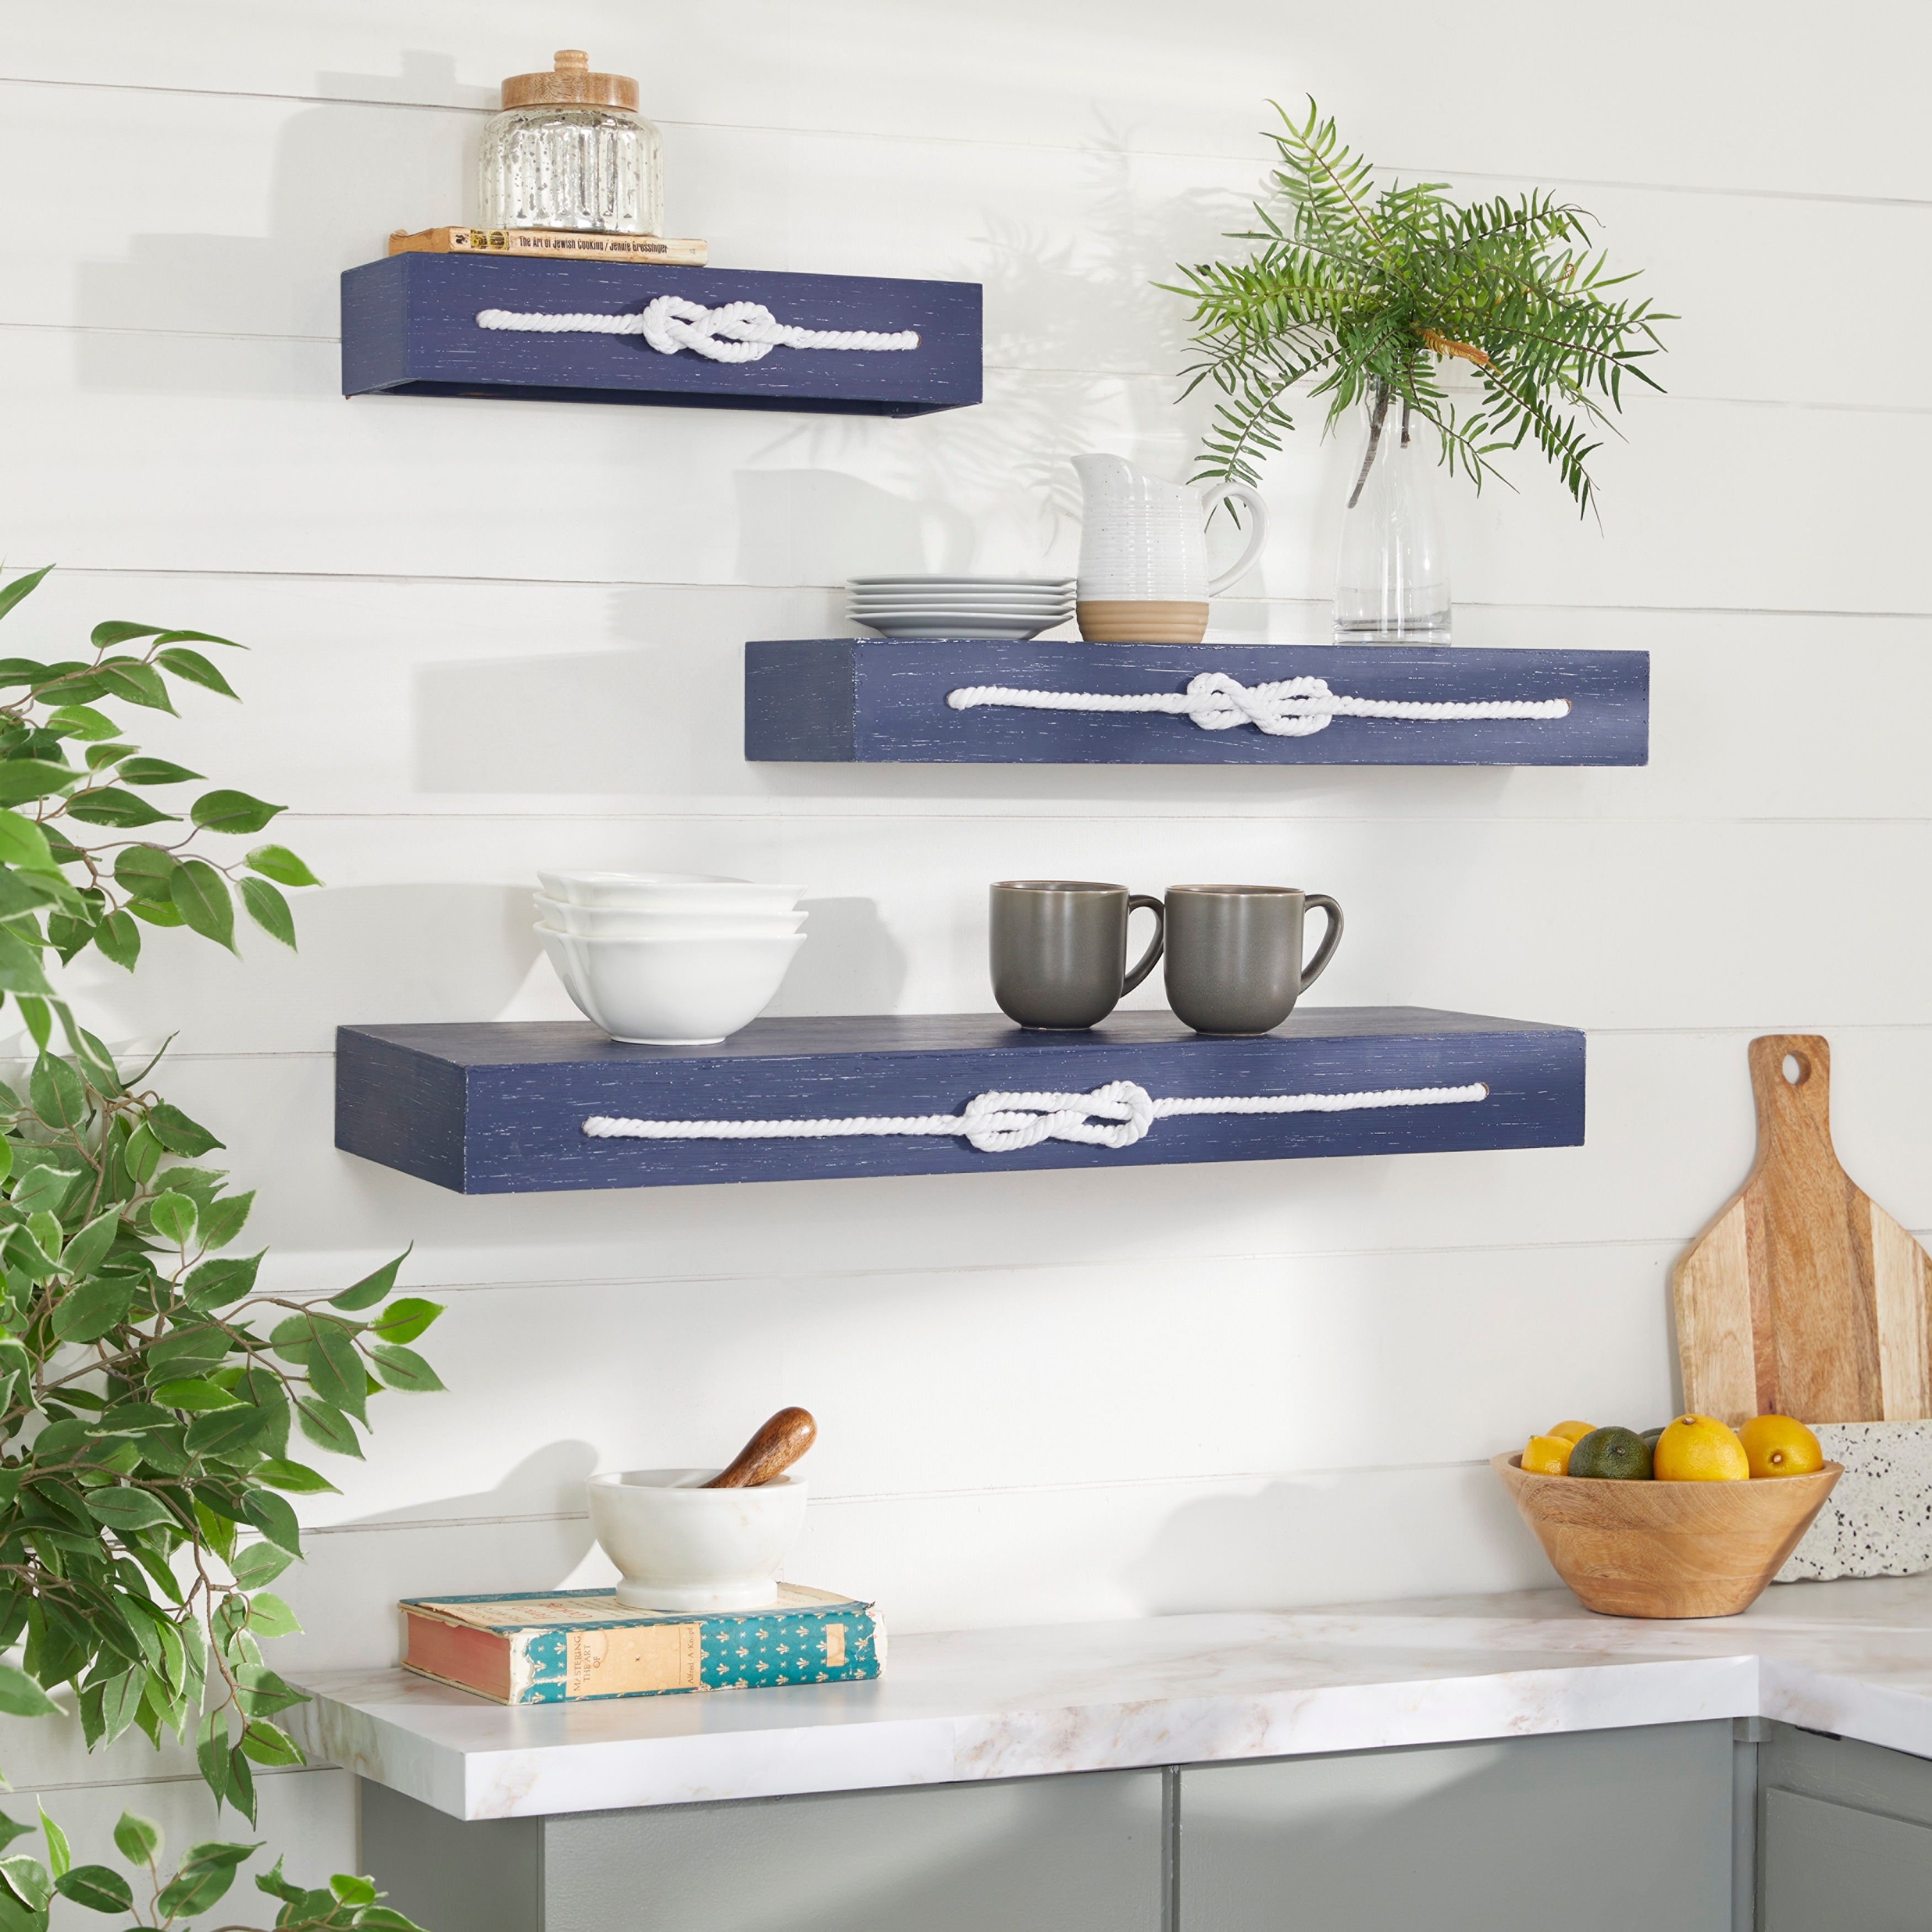 https://ak1.ostkcdn.com/images/products/is/images/direct/4d8b06254e066ae0bfdce0c75bd7e0e3bd0a5fa8/Blue-Wood-Contemporary-Wall-Shelf-%28Set-of-3%29.jpg